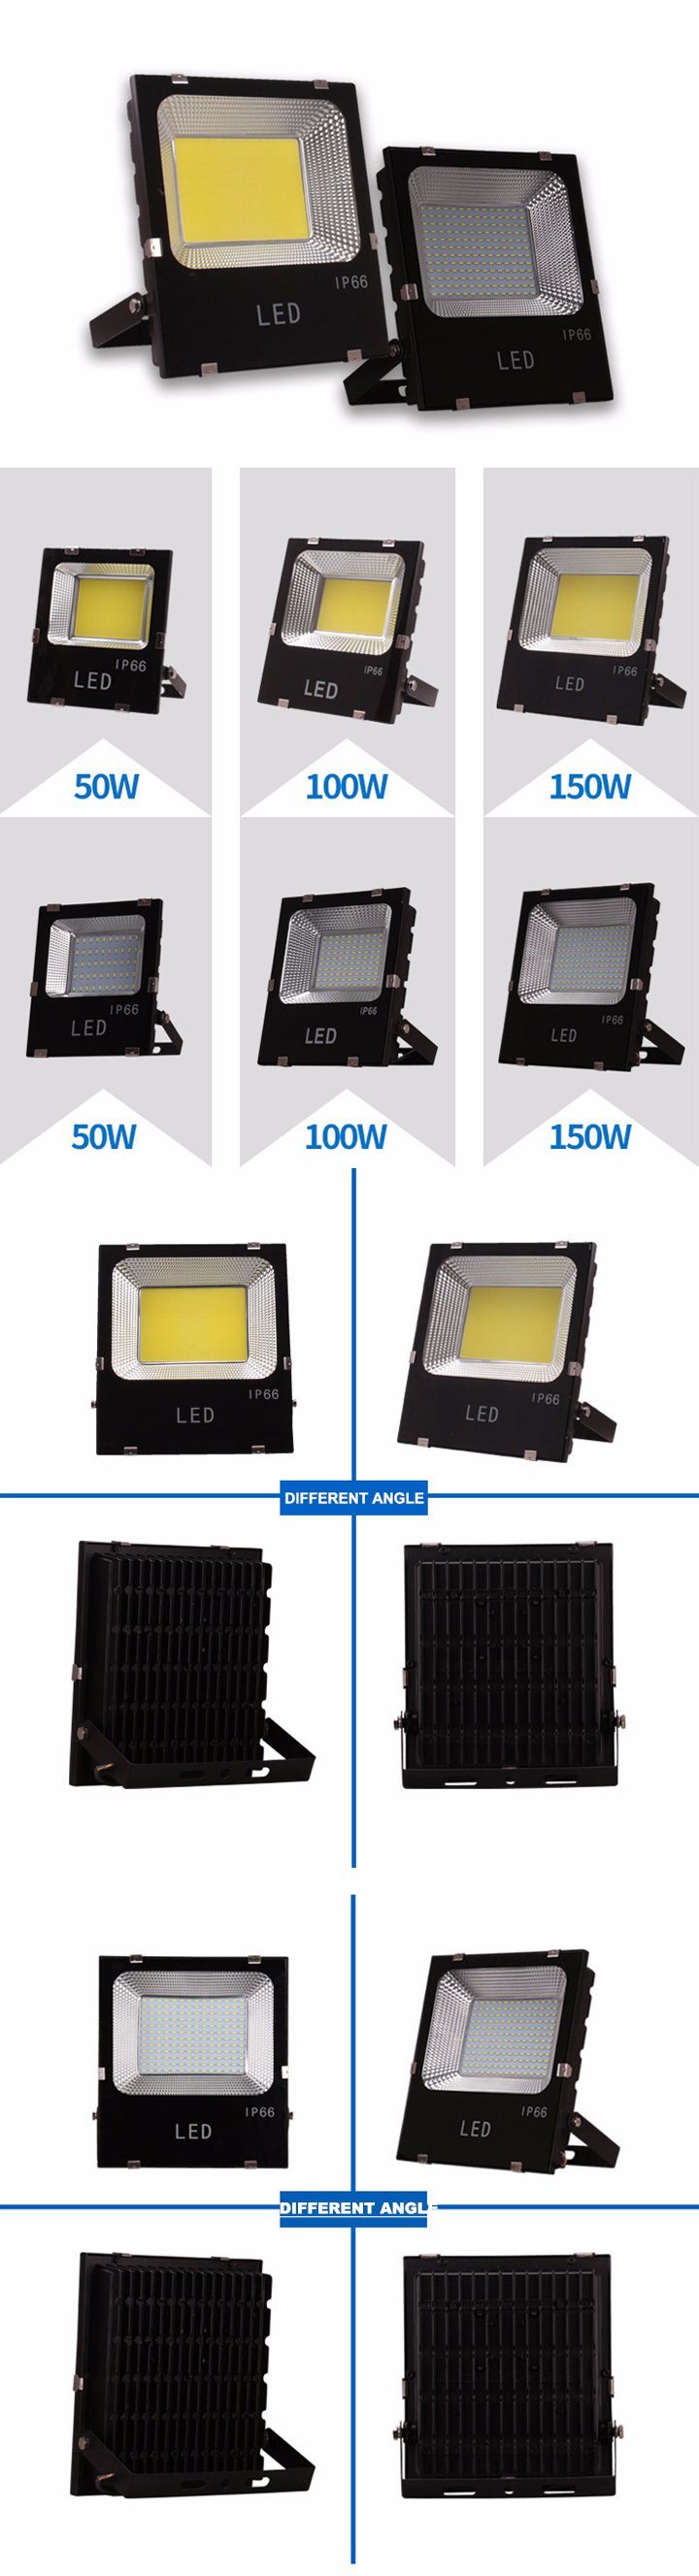 SMD LED Floodlight with Small Size